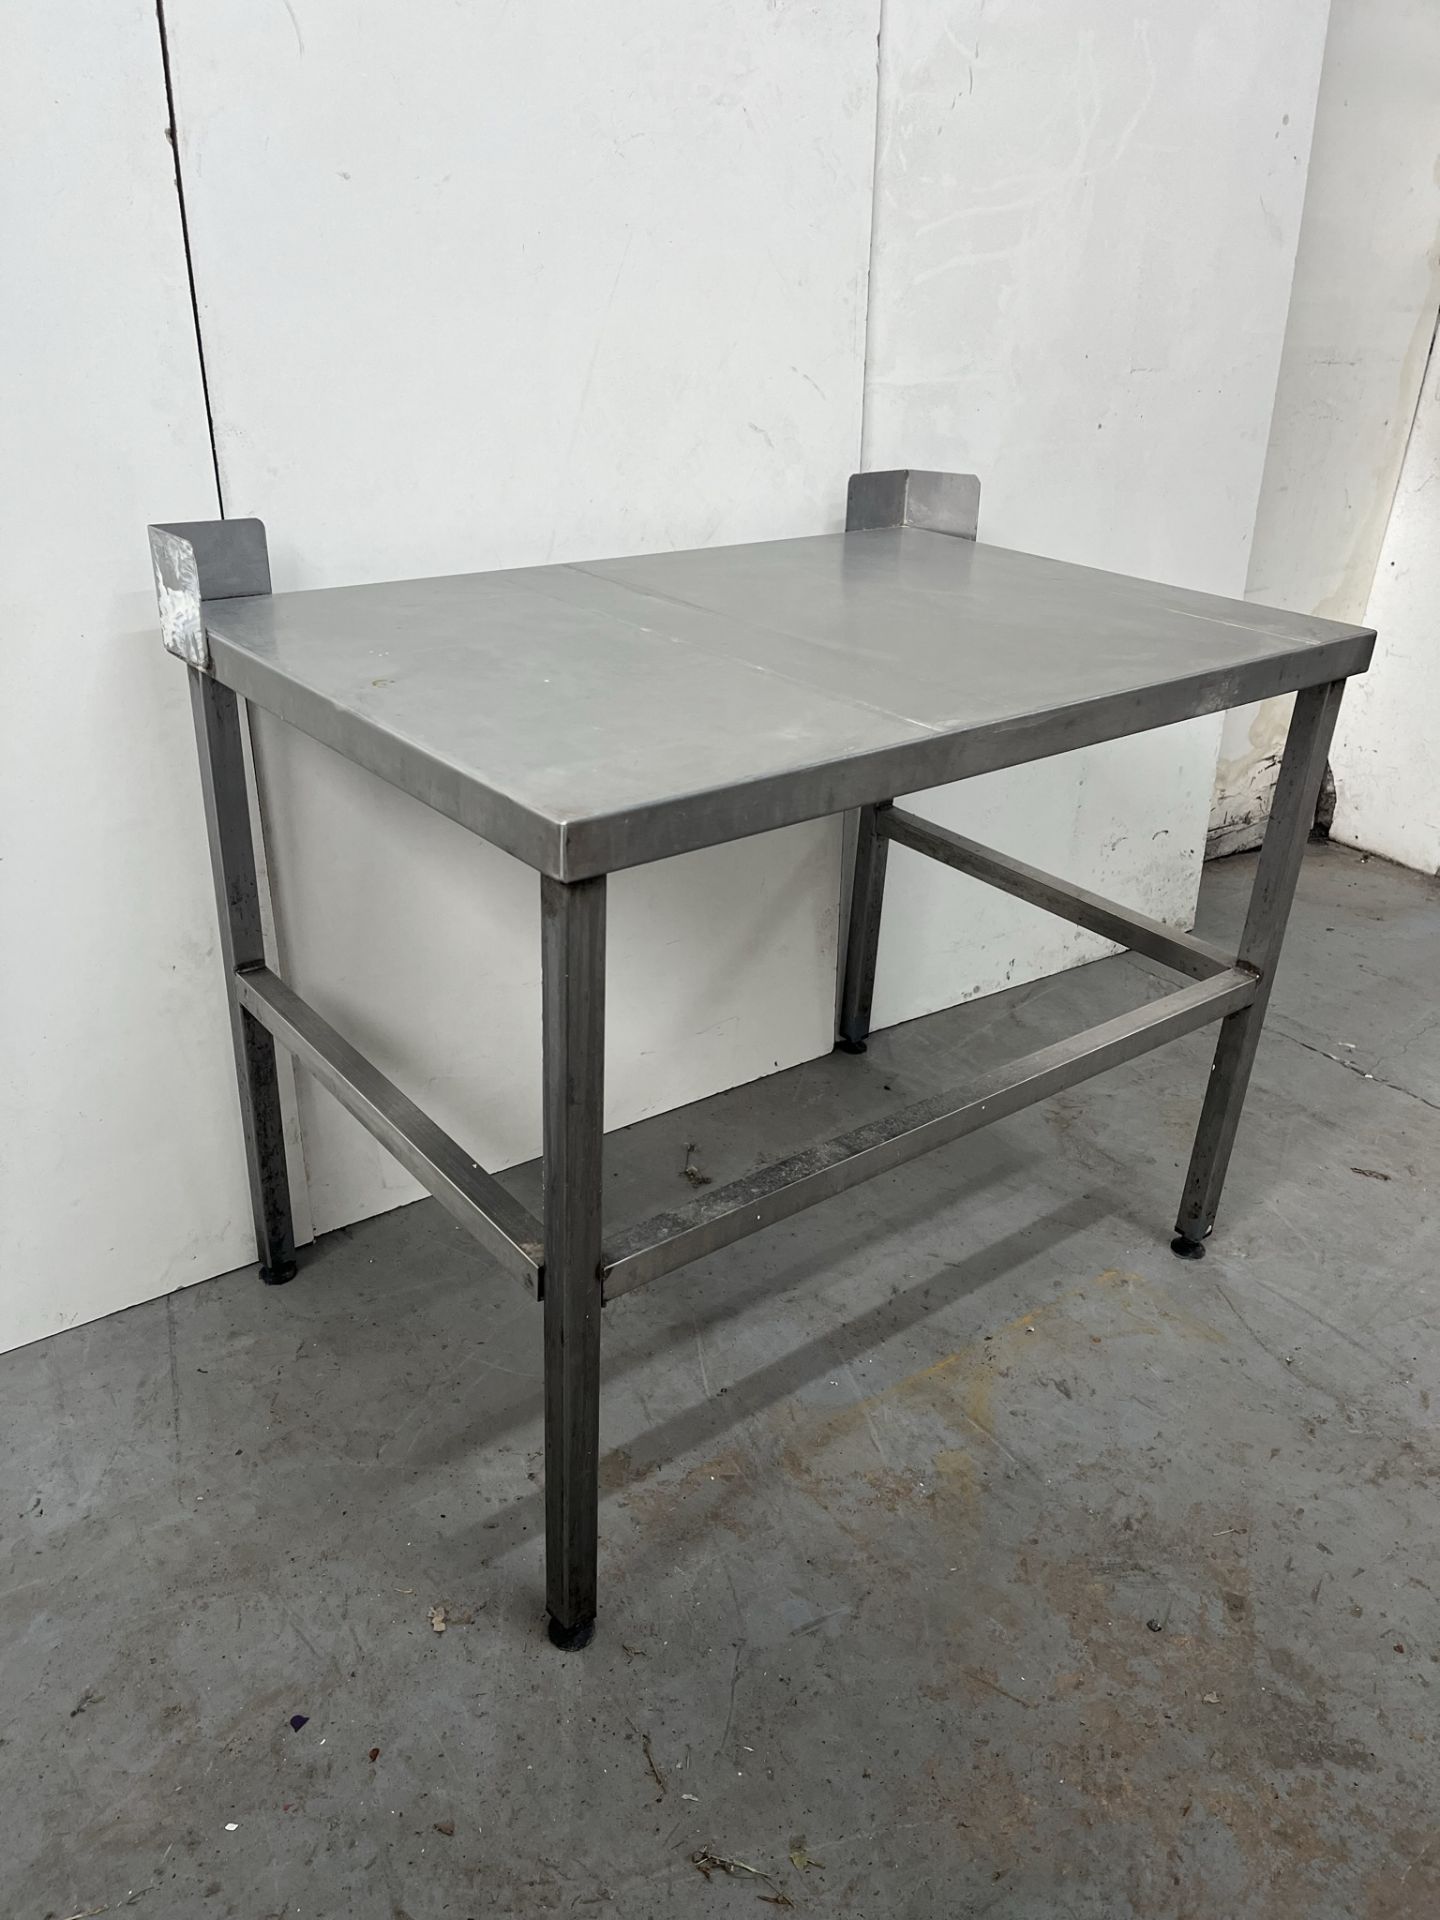 900mm Stainless Steel Catering Preperation Table - Image 4 of 4